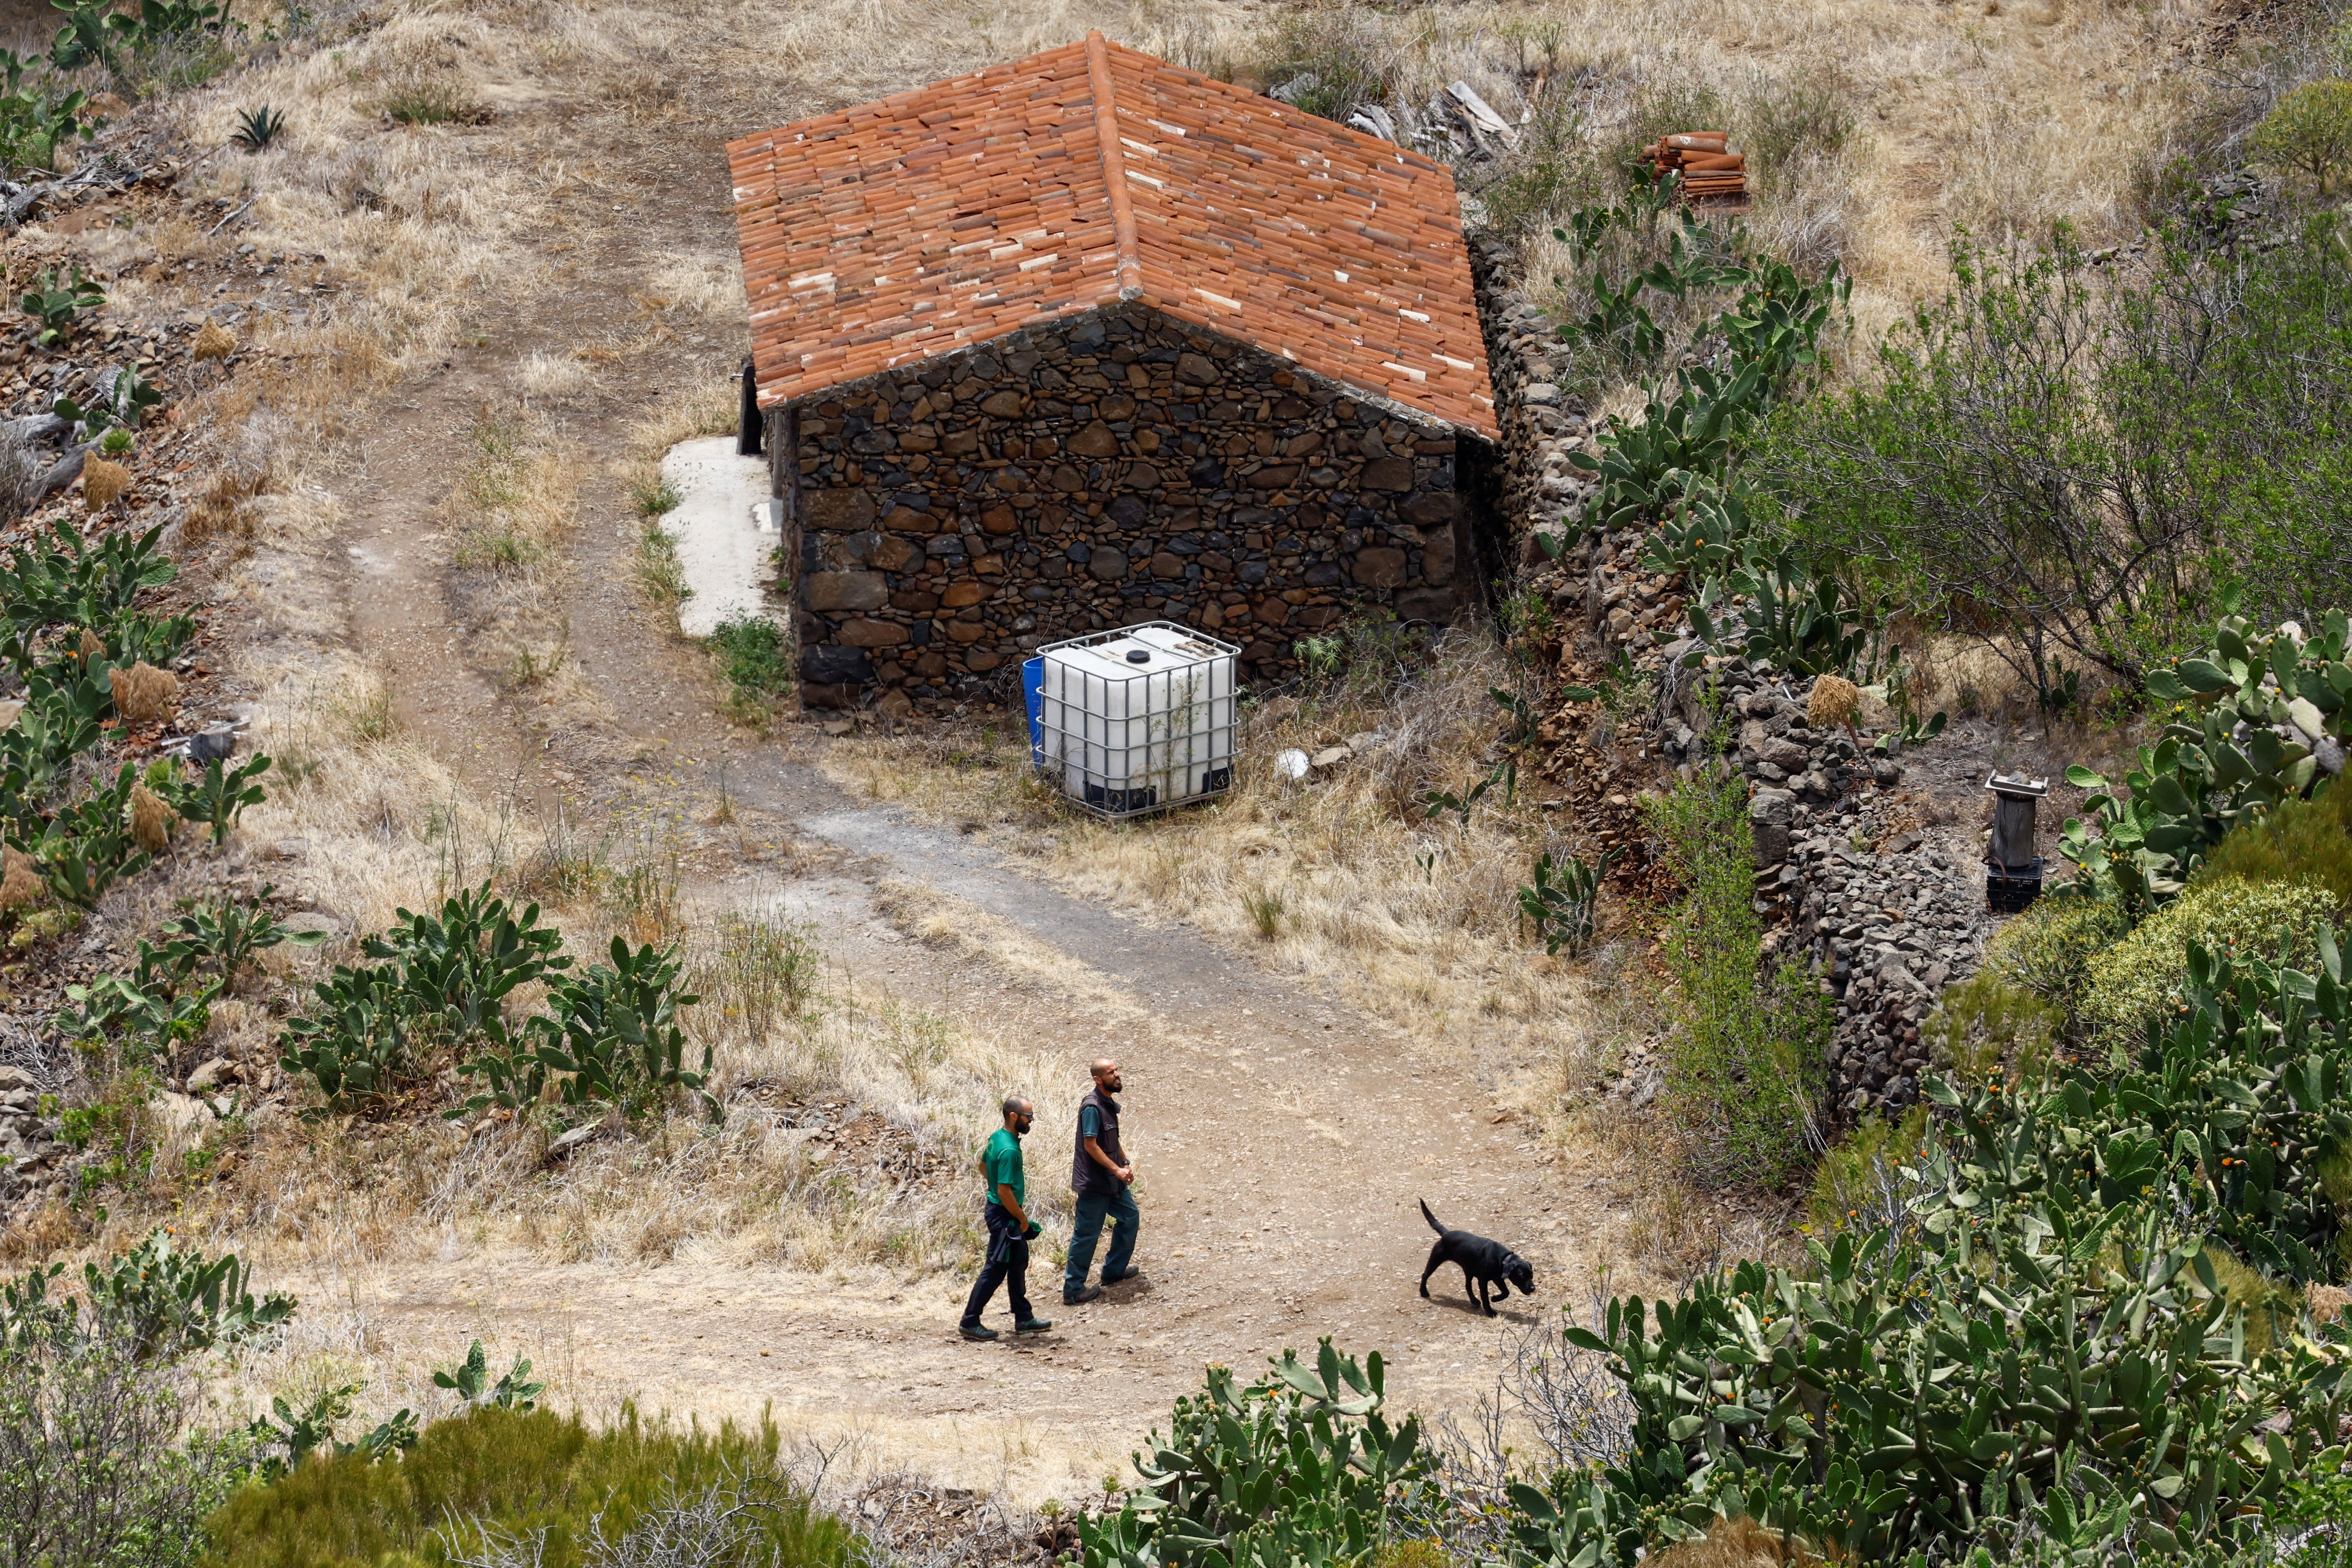 Police officers combing the Masca Valley in search of clues